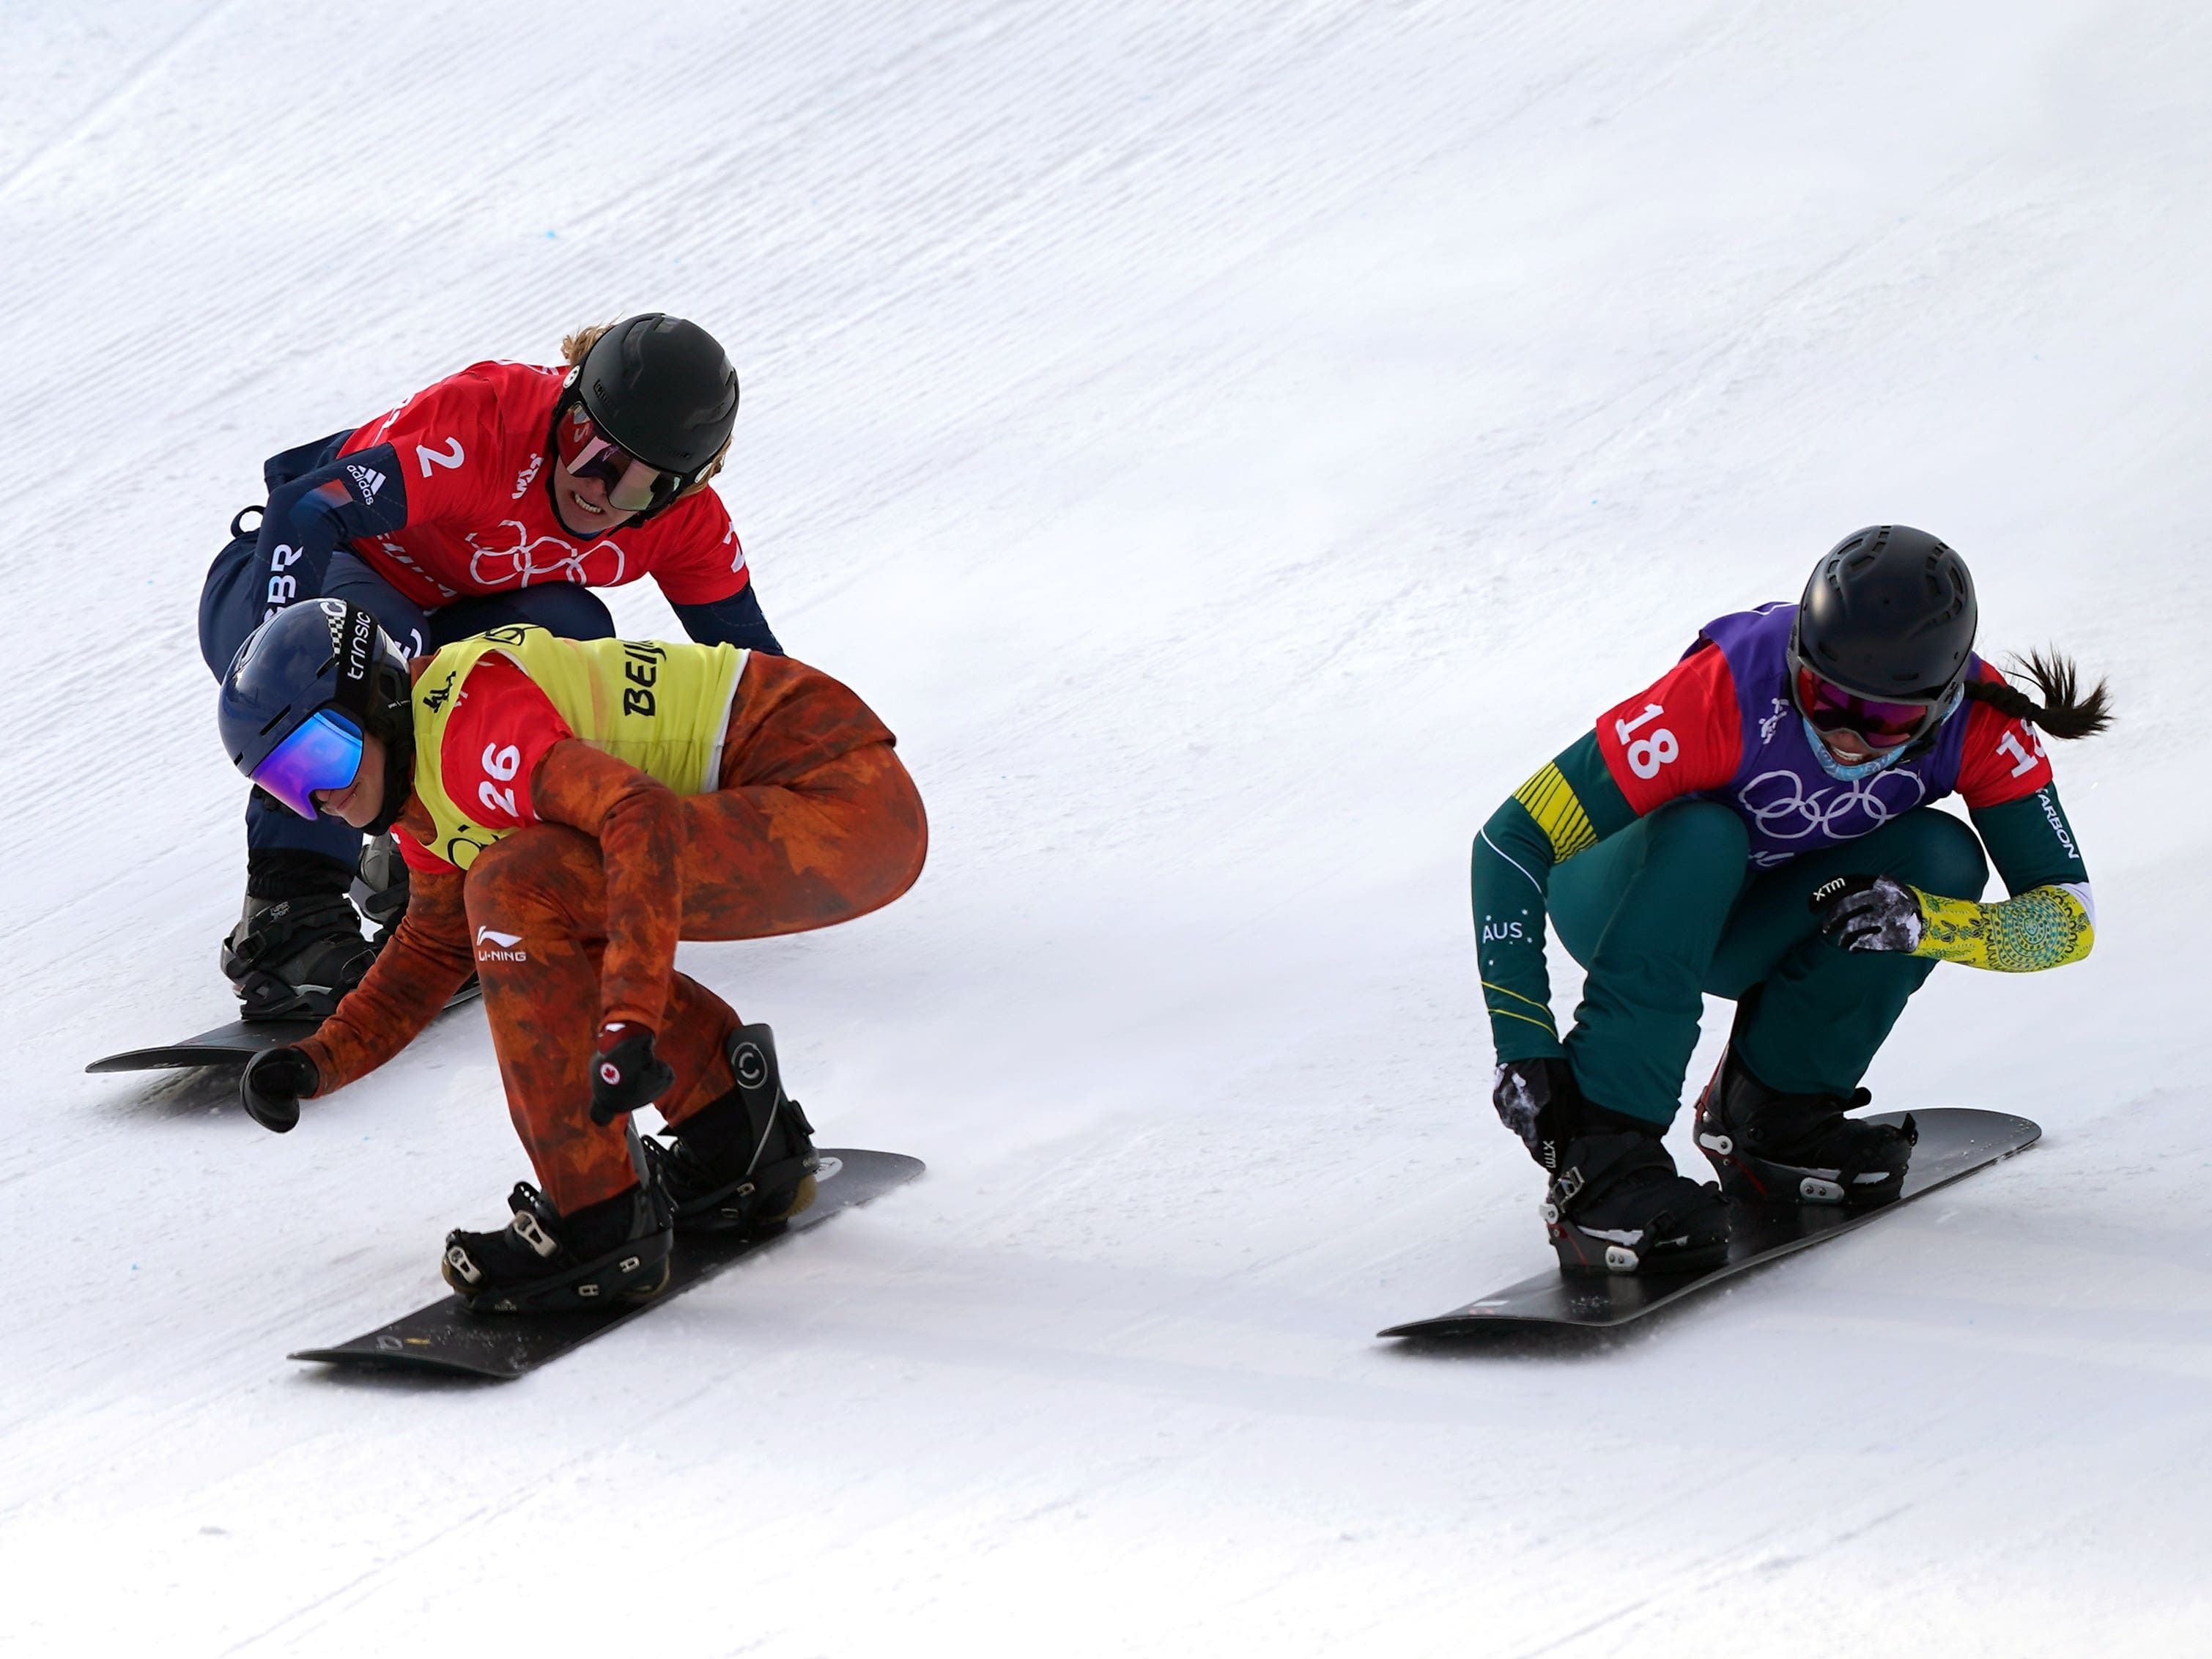 Today at the Winter Olympics: Charlotte Bankes misses out on snowboard medal